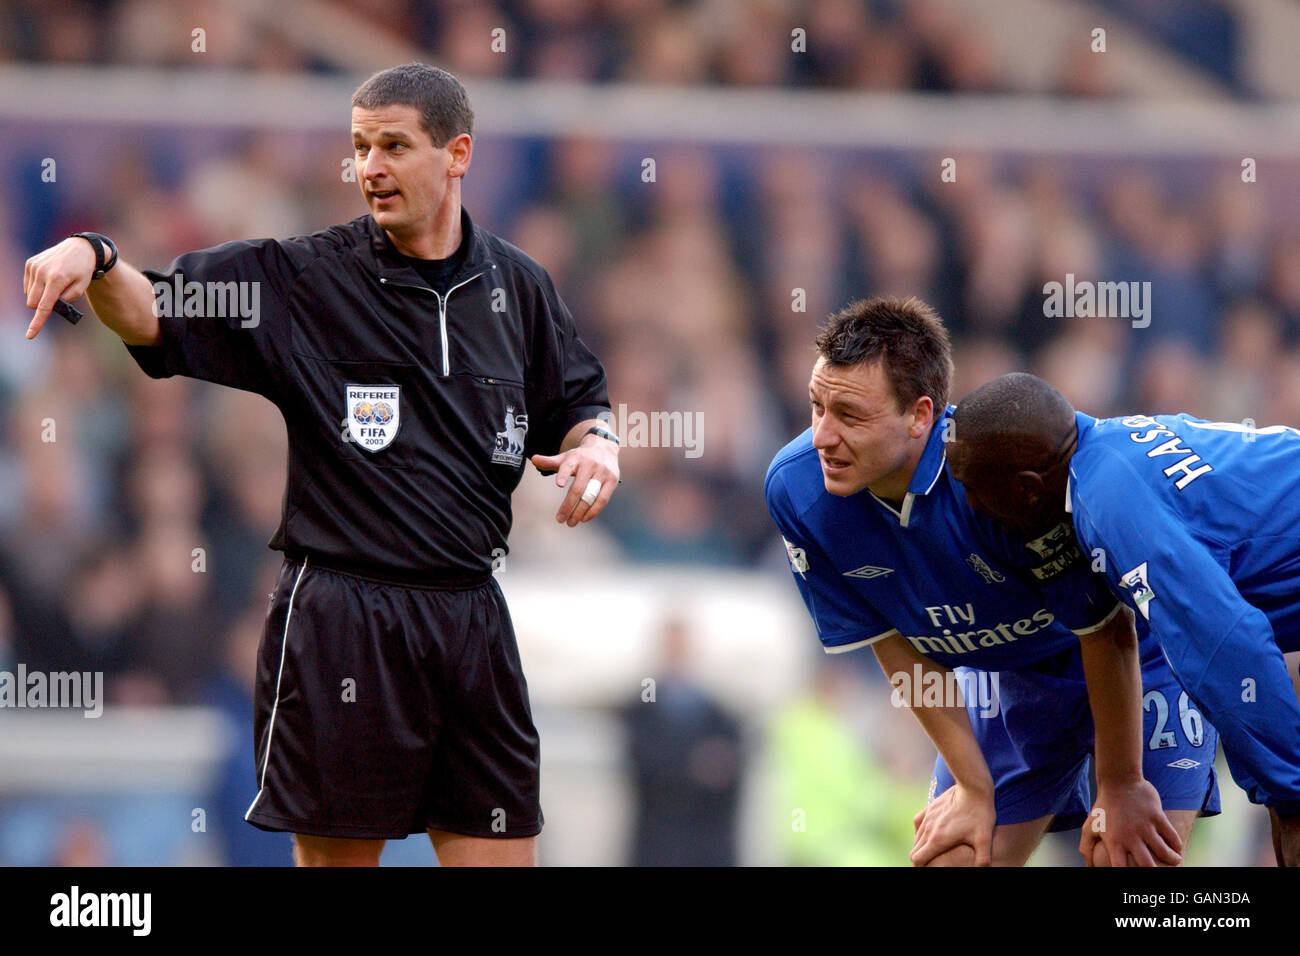 Soccer - FA Barclaycard Premiership - West Bromwich Albion v Chelsea. Chelsea's John Terry (c) and teammate Jimmy Floyd Hasselbaink (r) get a talking to from referee Andy D'Urso Stock Photo